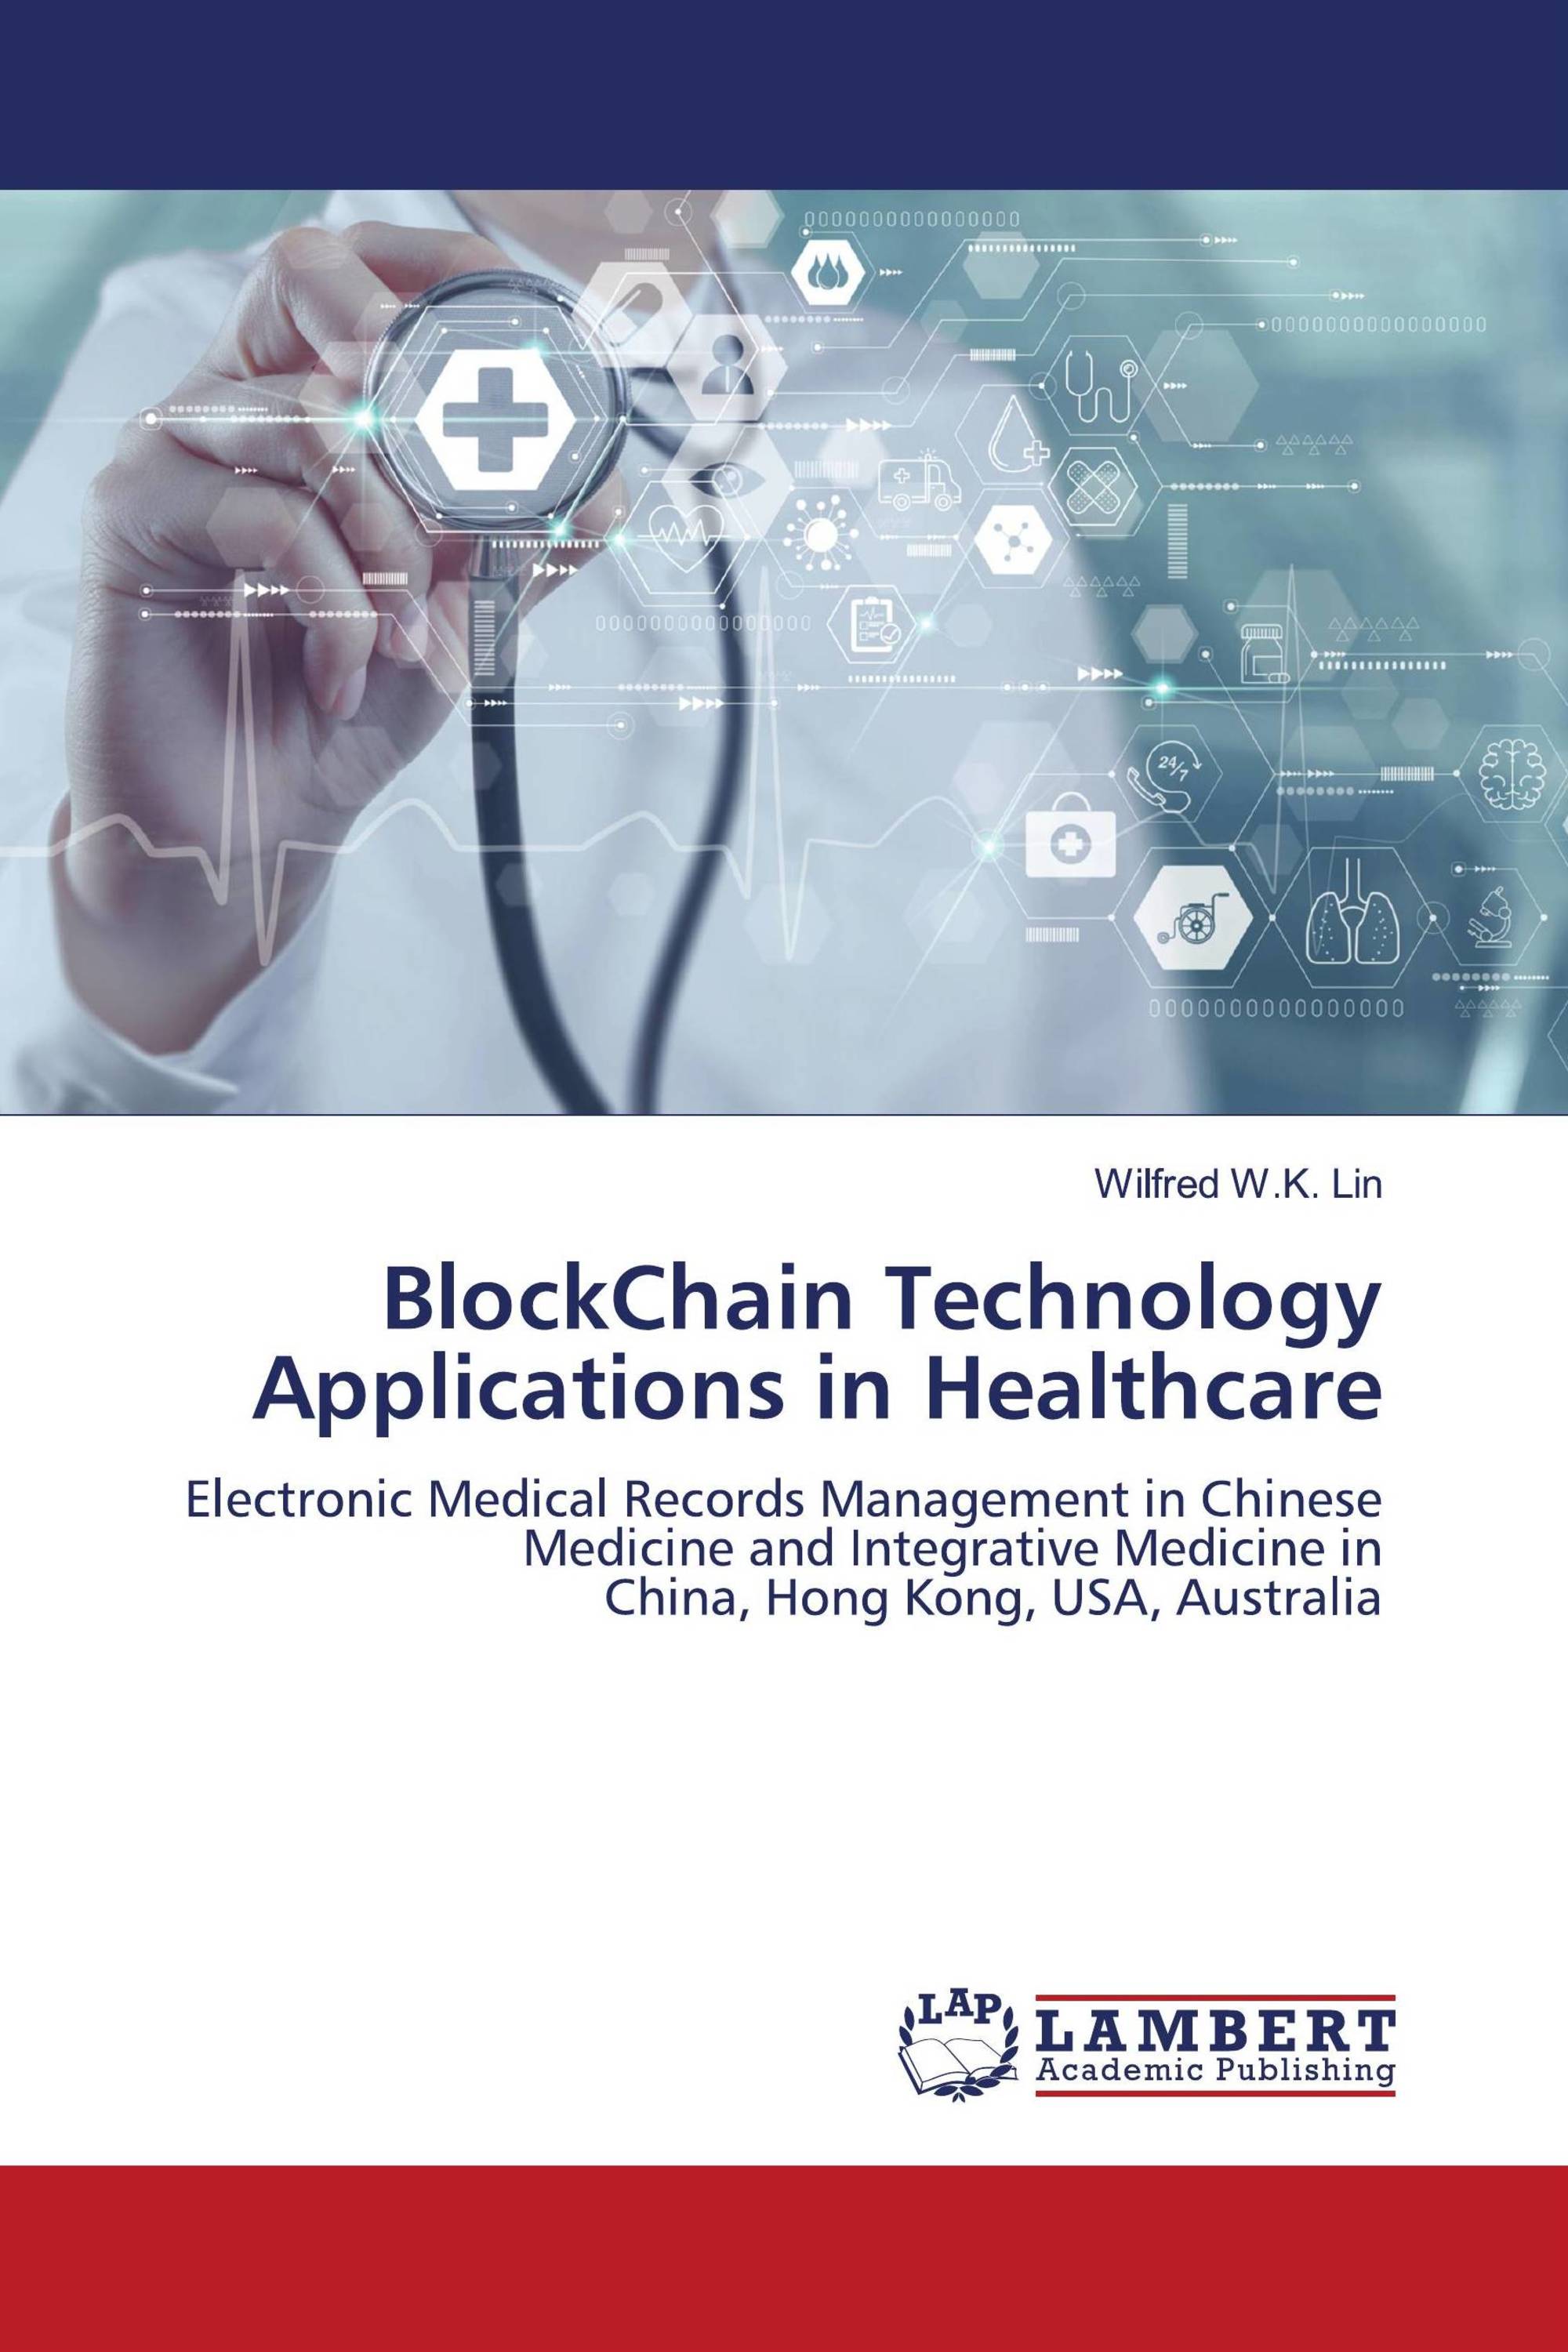 BlockChain Technology Applications in Healthcare